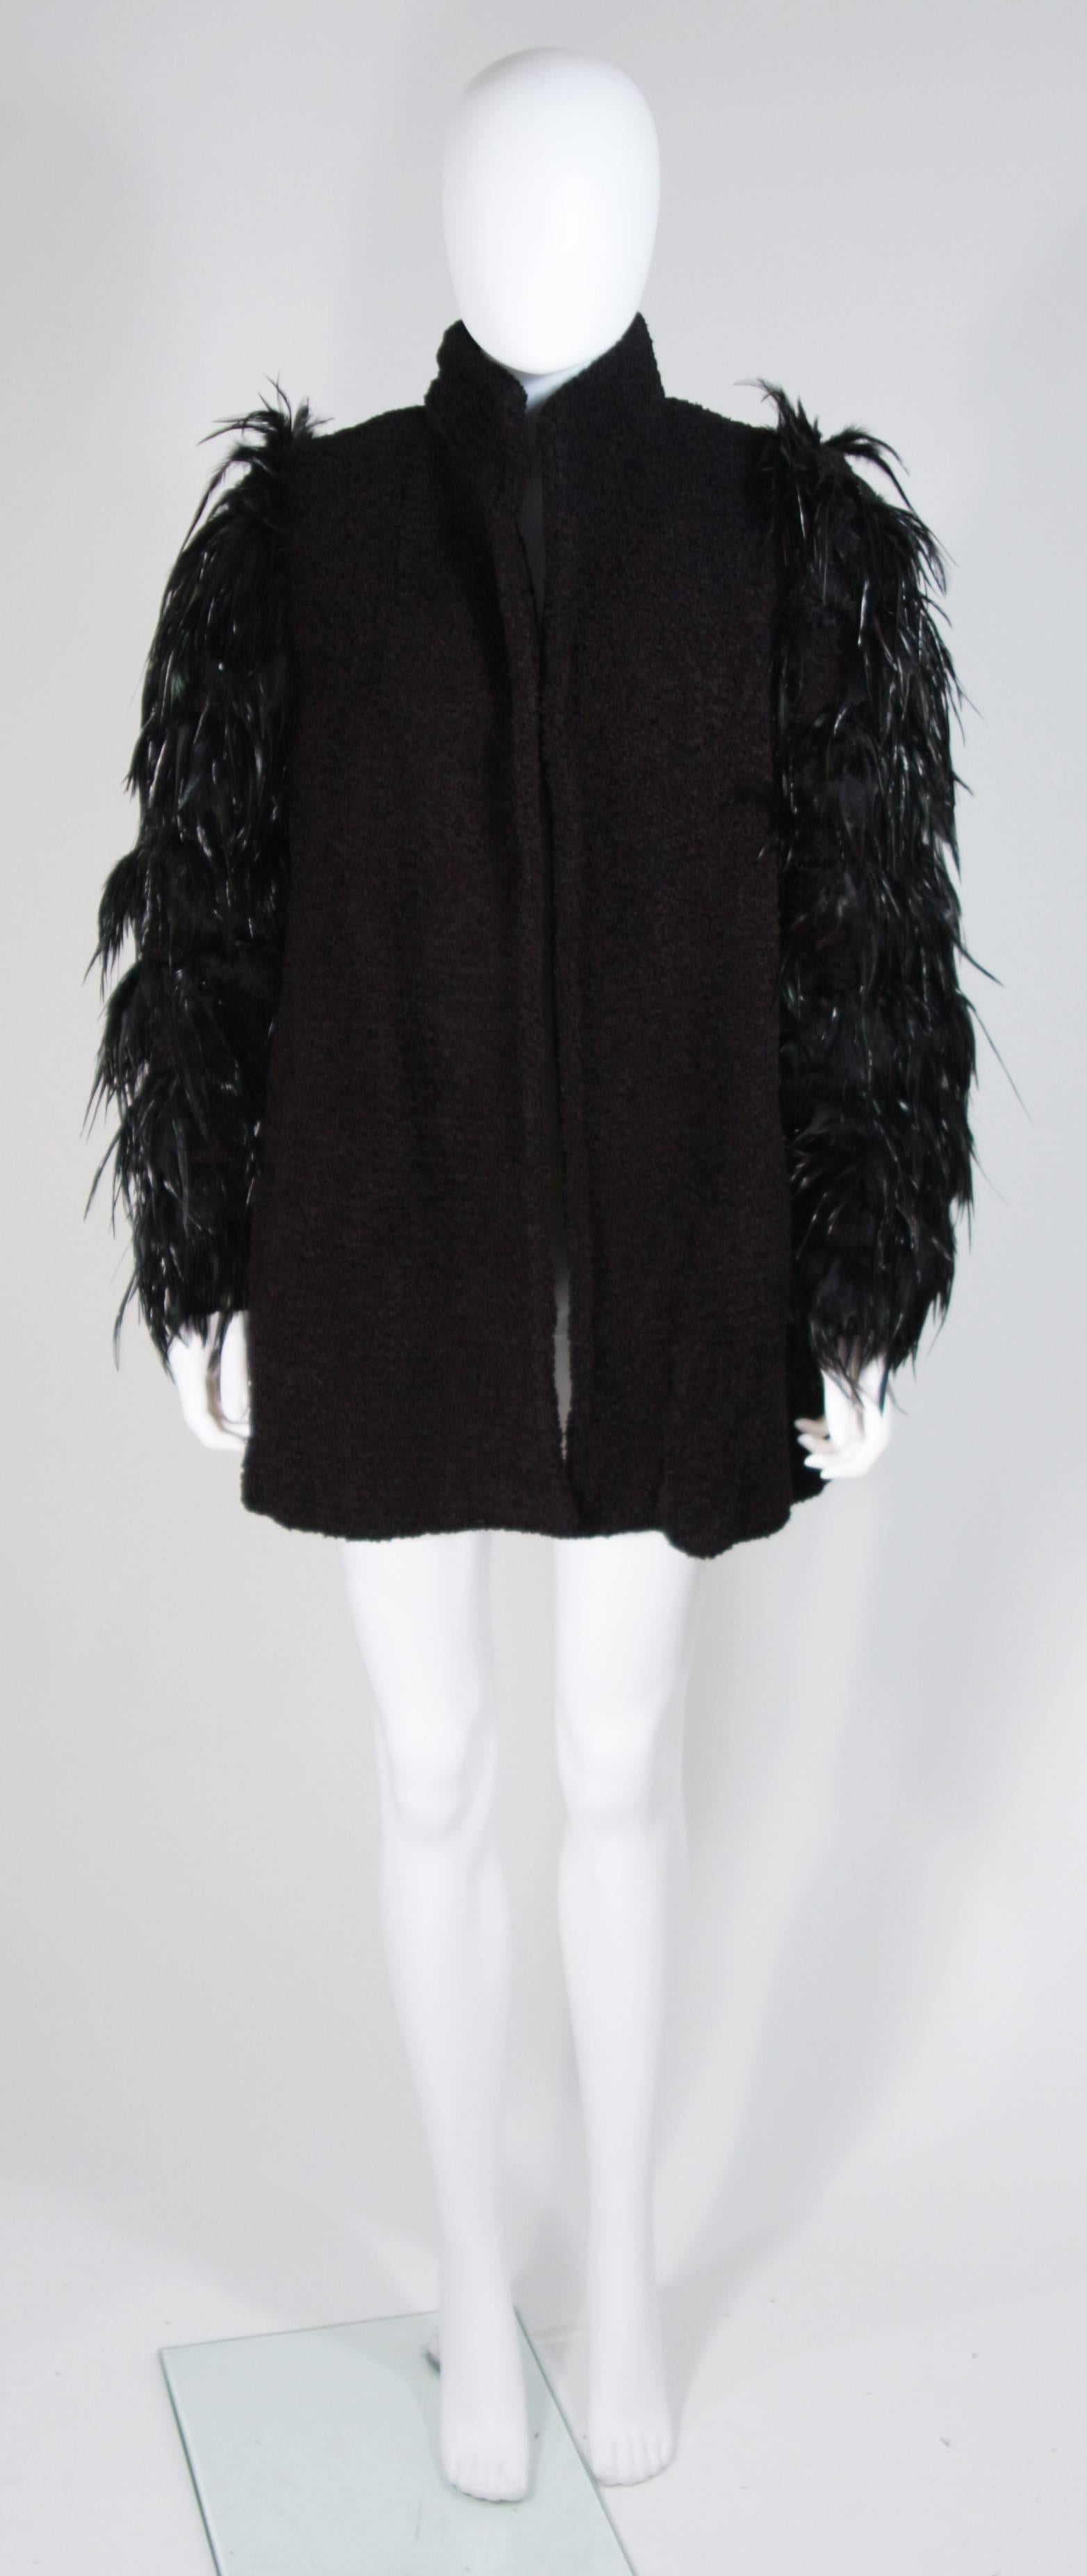   This Ted Lapidus  jacket is composed of a black lana wool and features black feather applique on the sleeves. Open style design, side pockets, and a mandarin style collar. In excellent vintage condition. 

  **Please cross-reference measurements